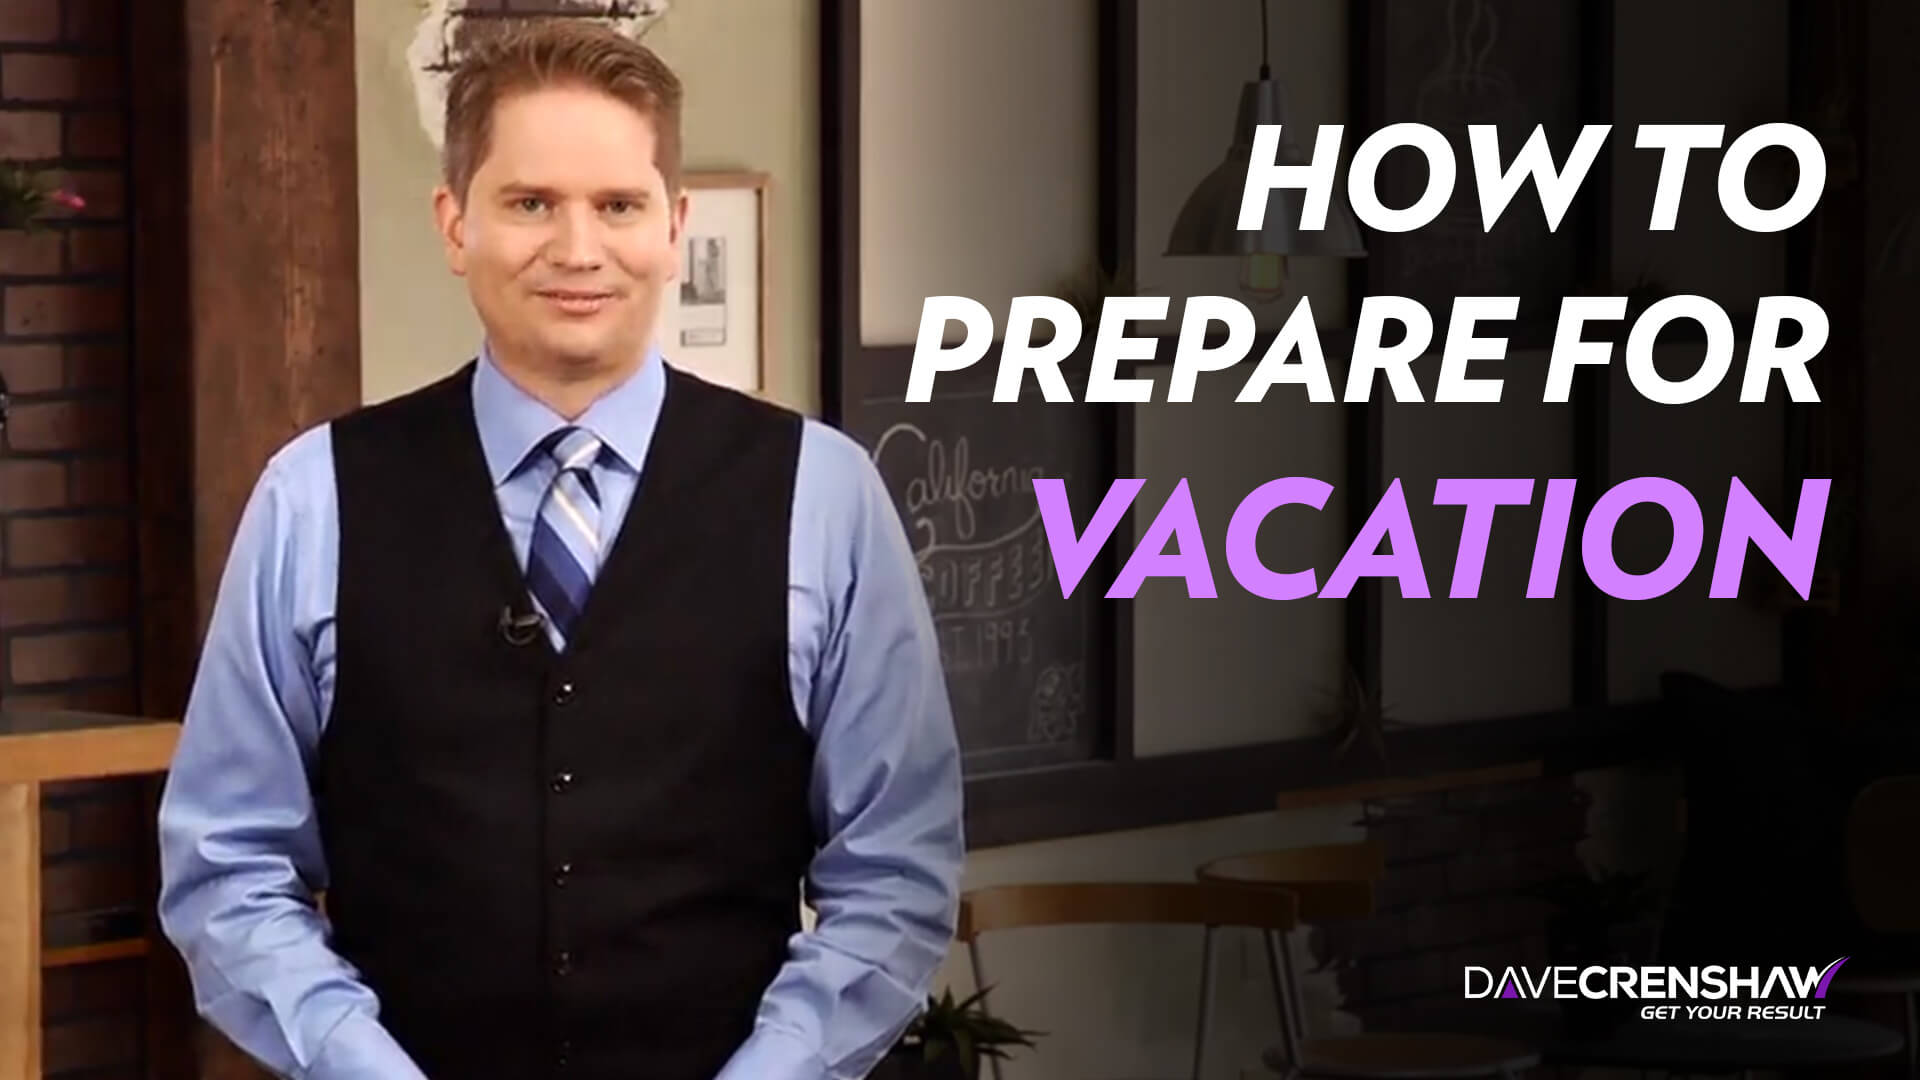 How to prepare for vacation